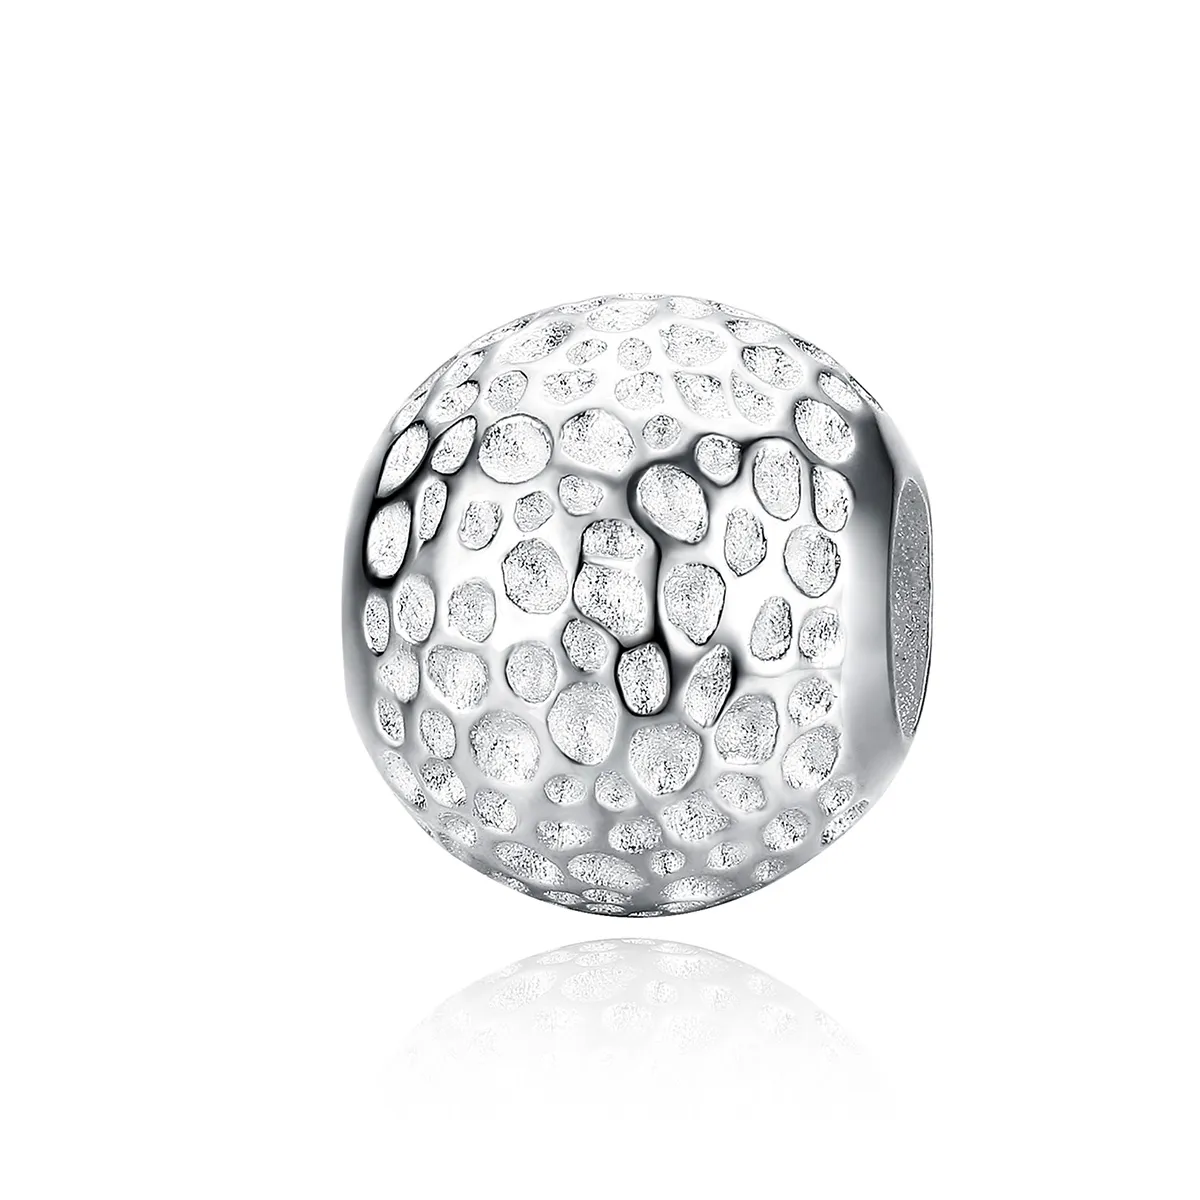 Pandora Style Silver Bead with Texture Charm - SCC1245